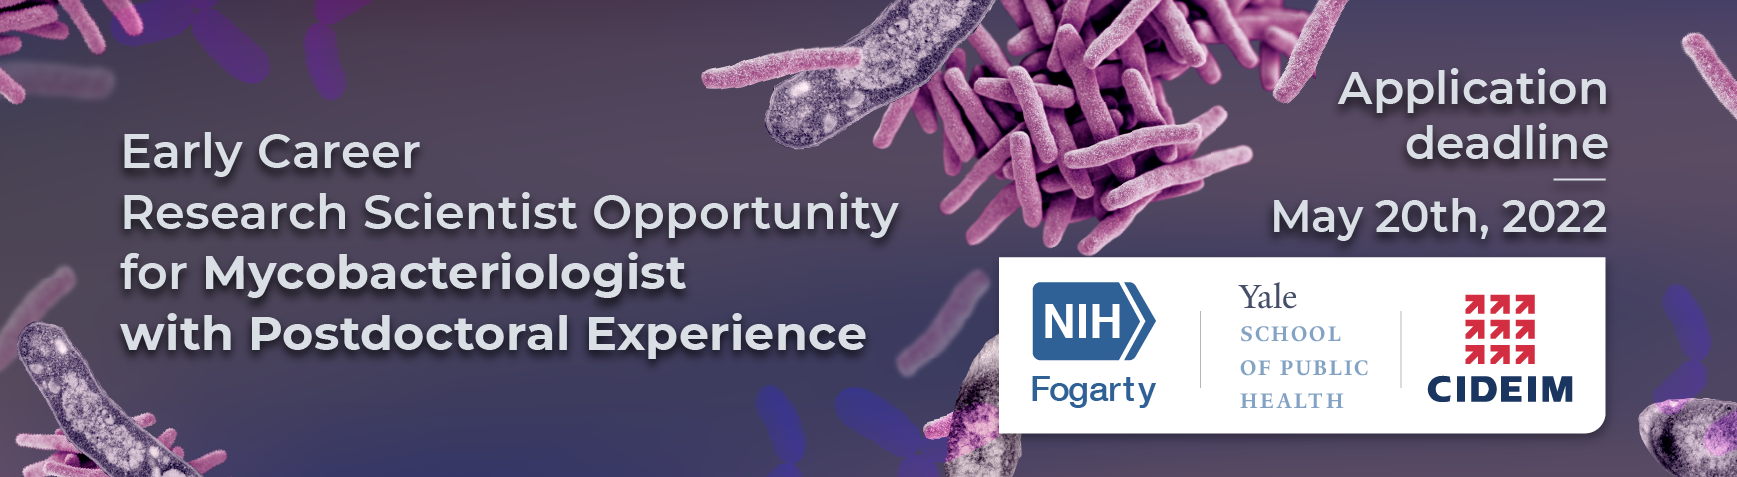 Early Career Research Scientist Opportunity for Mycobacteriologistt